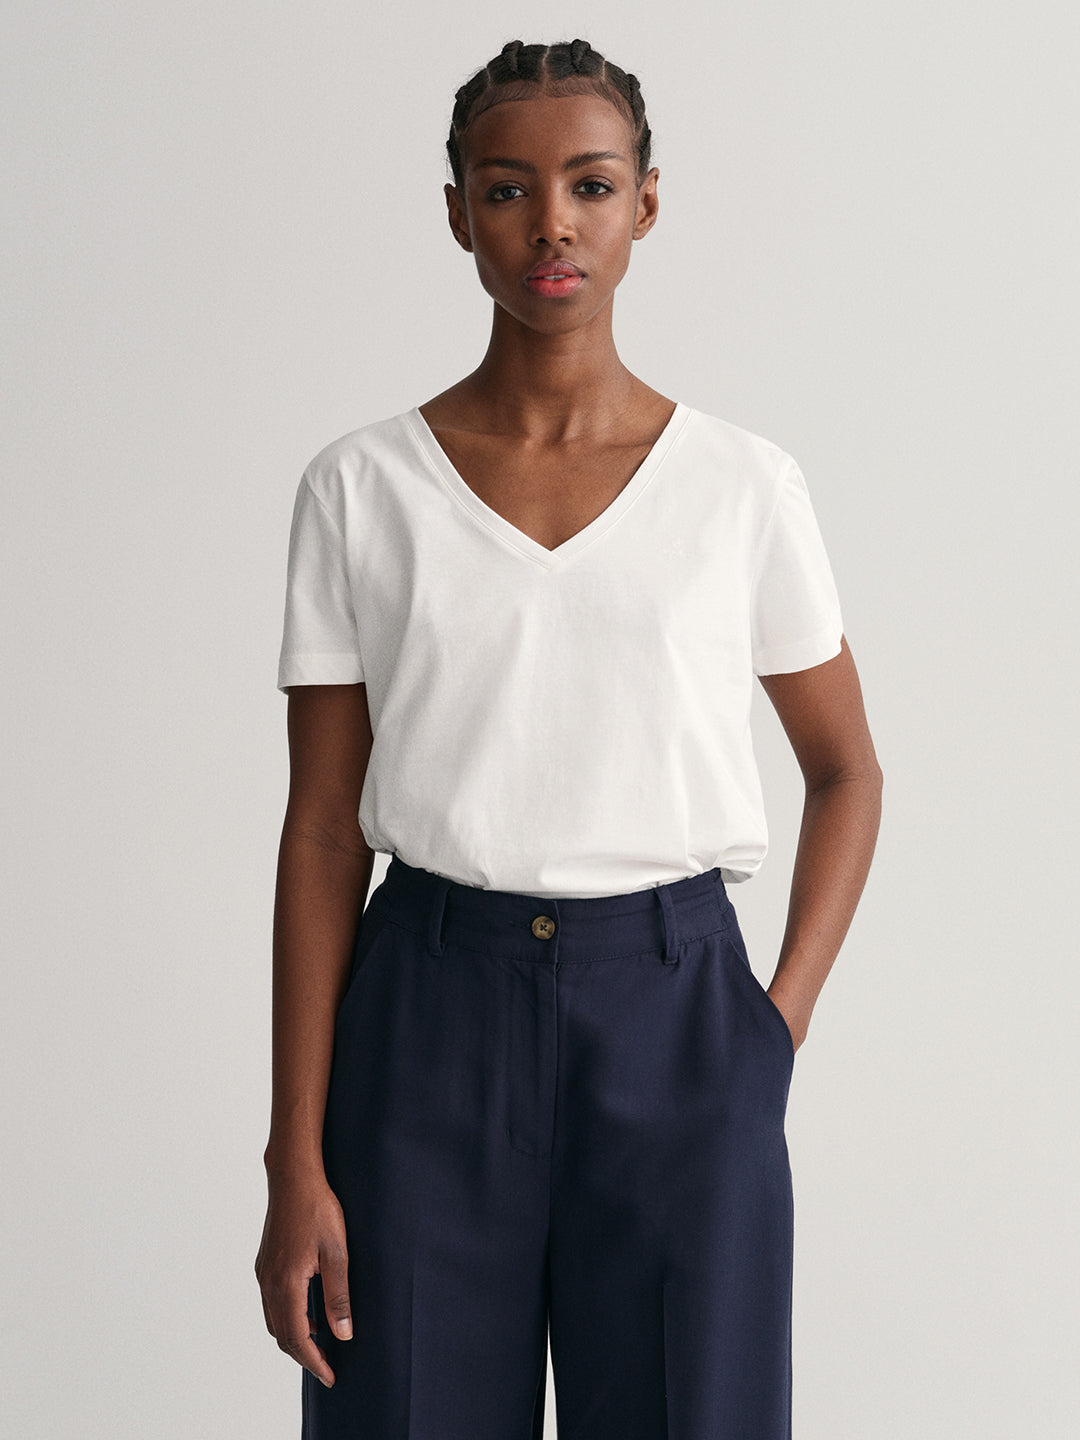 Gant White Preppy Relaxed Fit T-Shirt